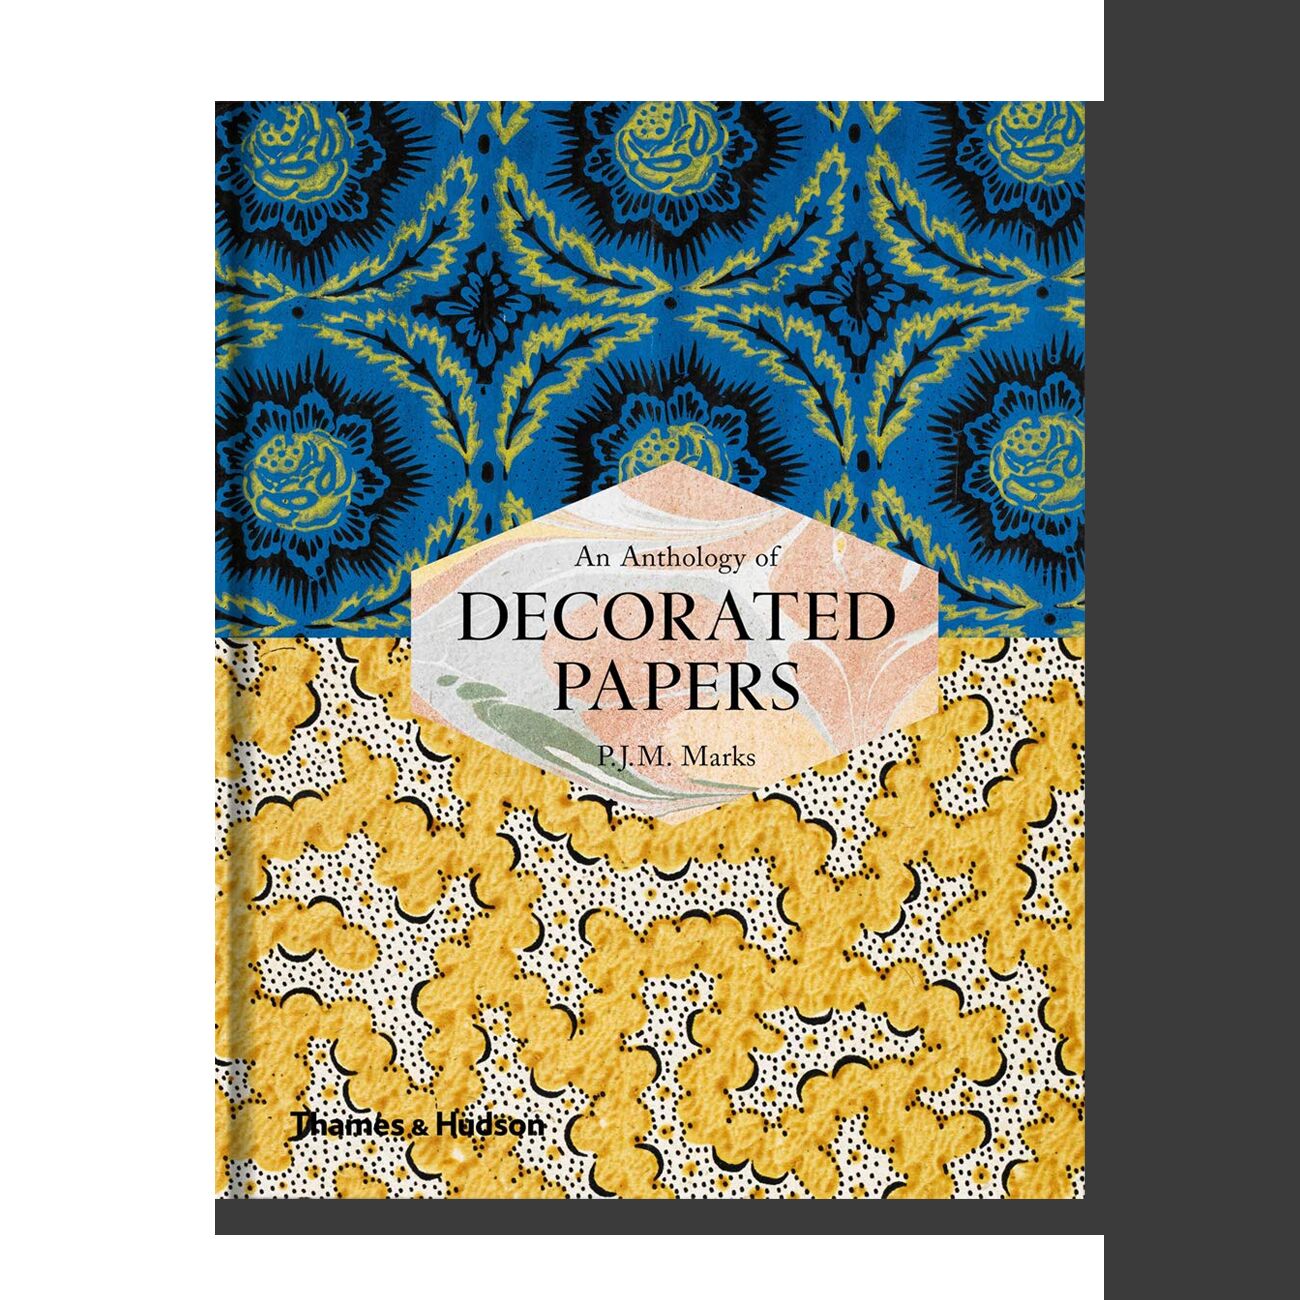 An Anthology of Decorated Papers: A Sourcebook for Designers